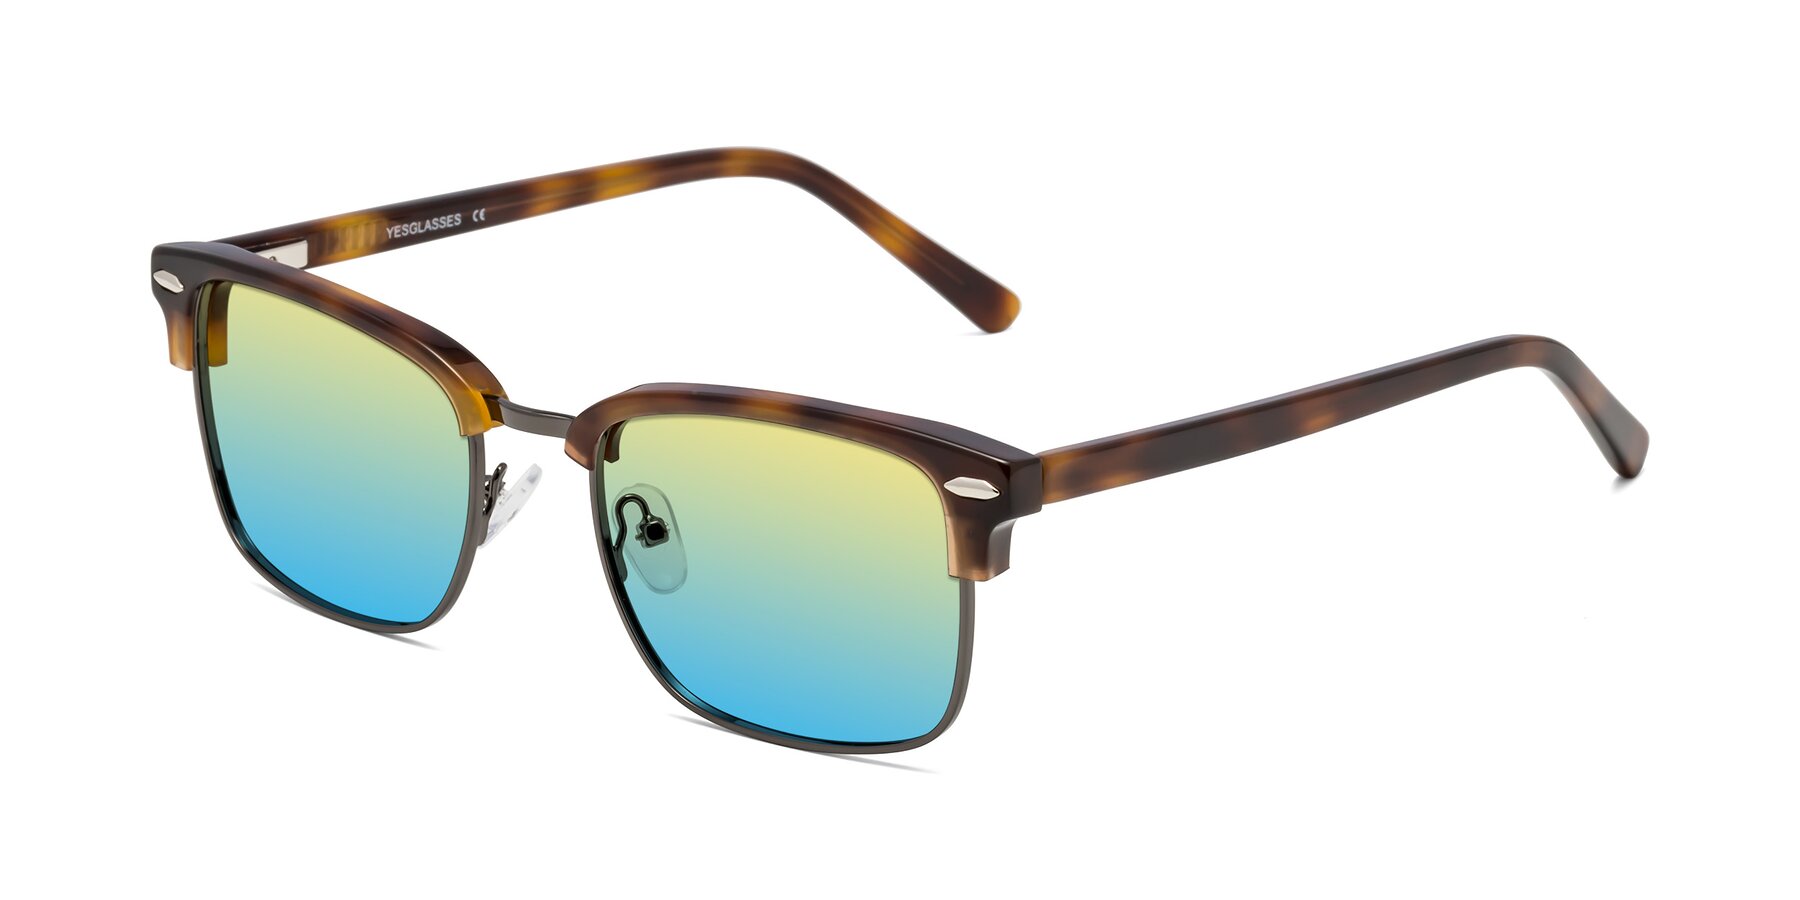 Angle of 17464 in Tortoise/ Gunmetal with Yellow / Blue Gradient Lenses